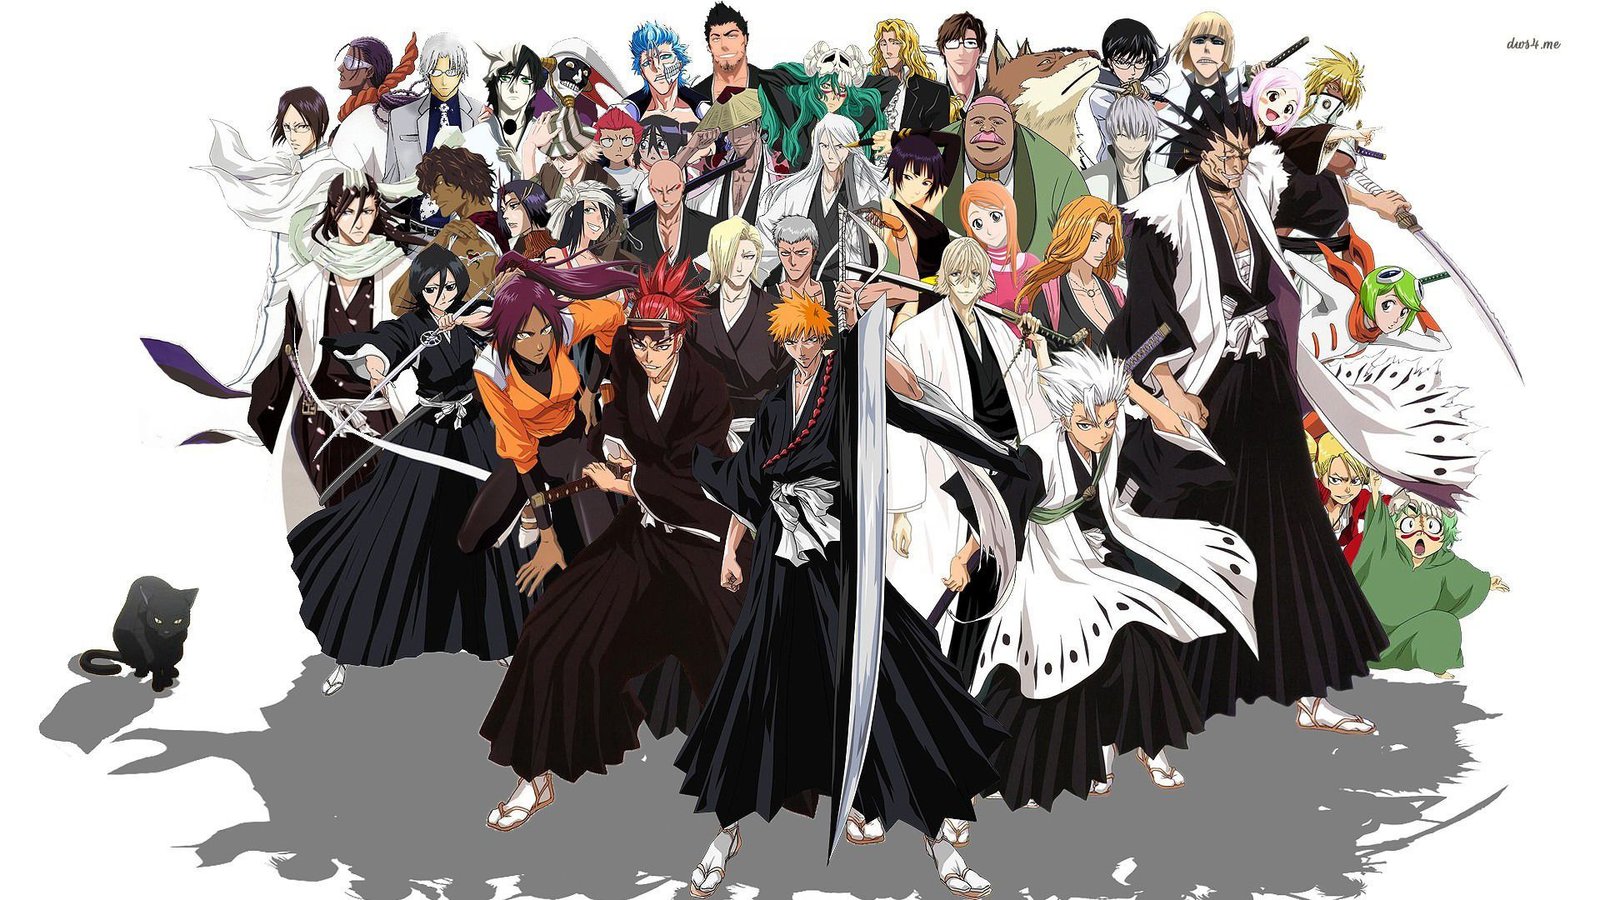 What Happens At The End of Bleach?